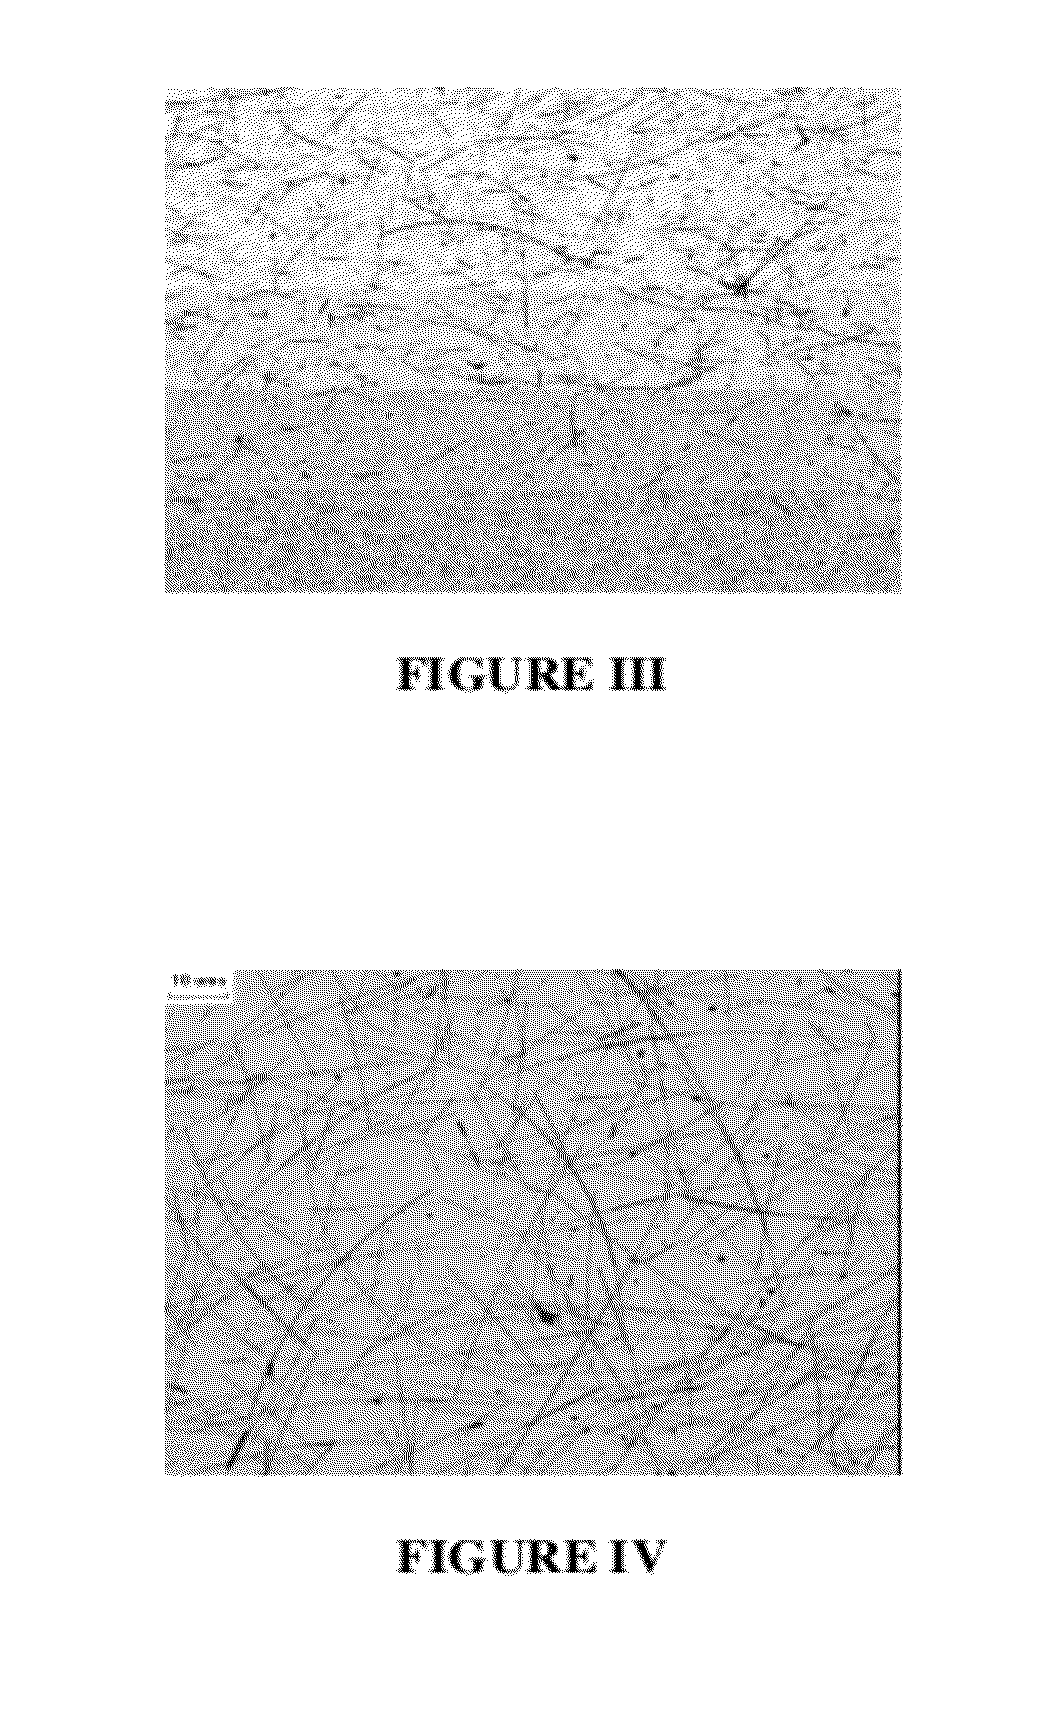 Transparent conductive film comprising water soluble binders